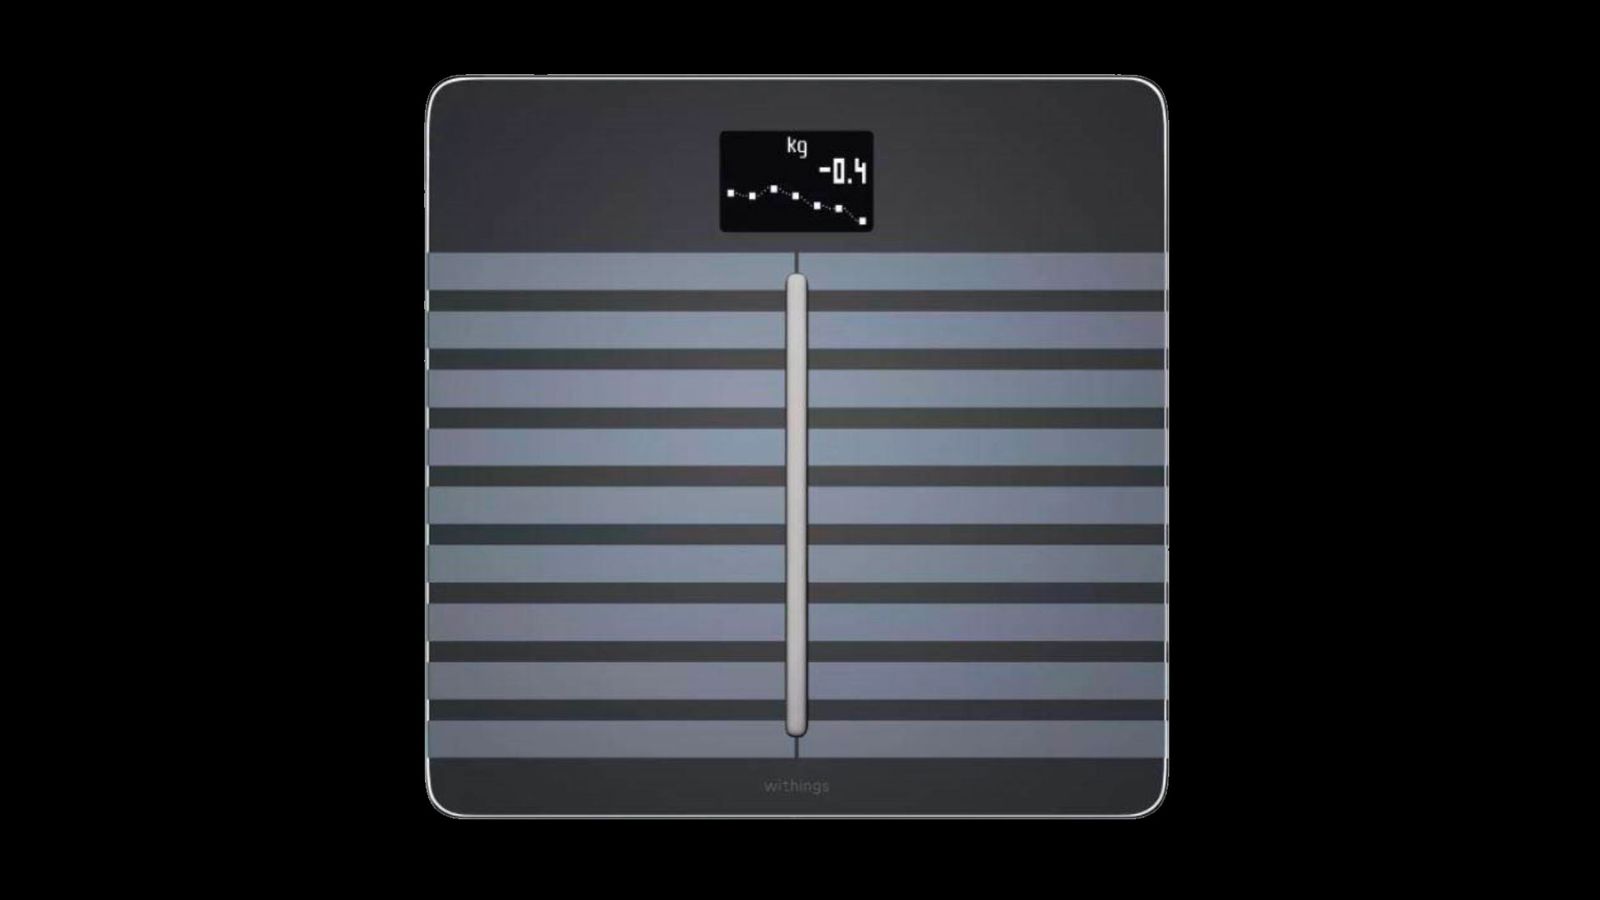 Withings Body Cardio product image of a black scale featuring grey stripes and an accompanying smartphone on the right side.